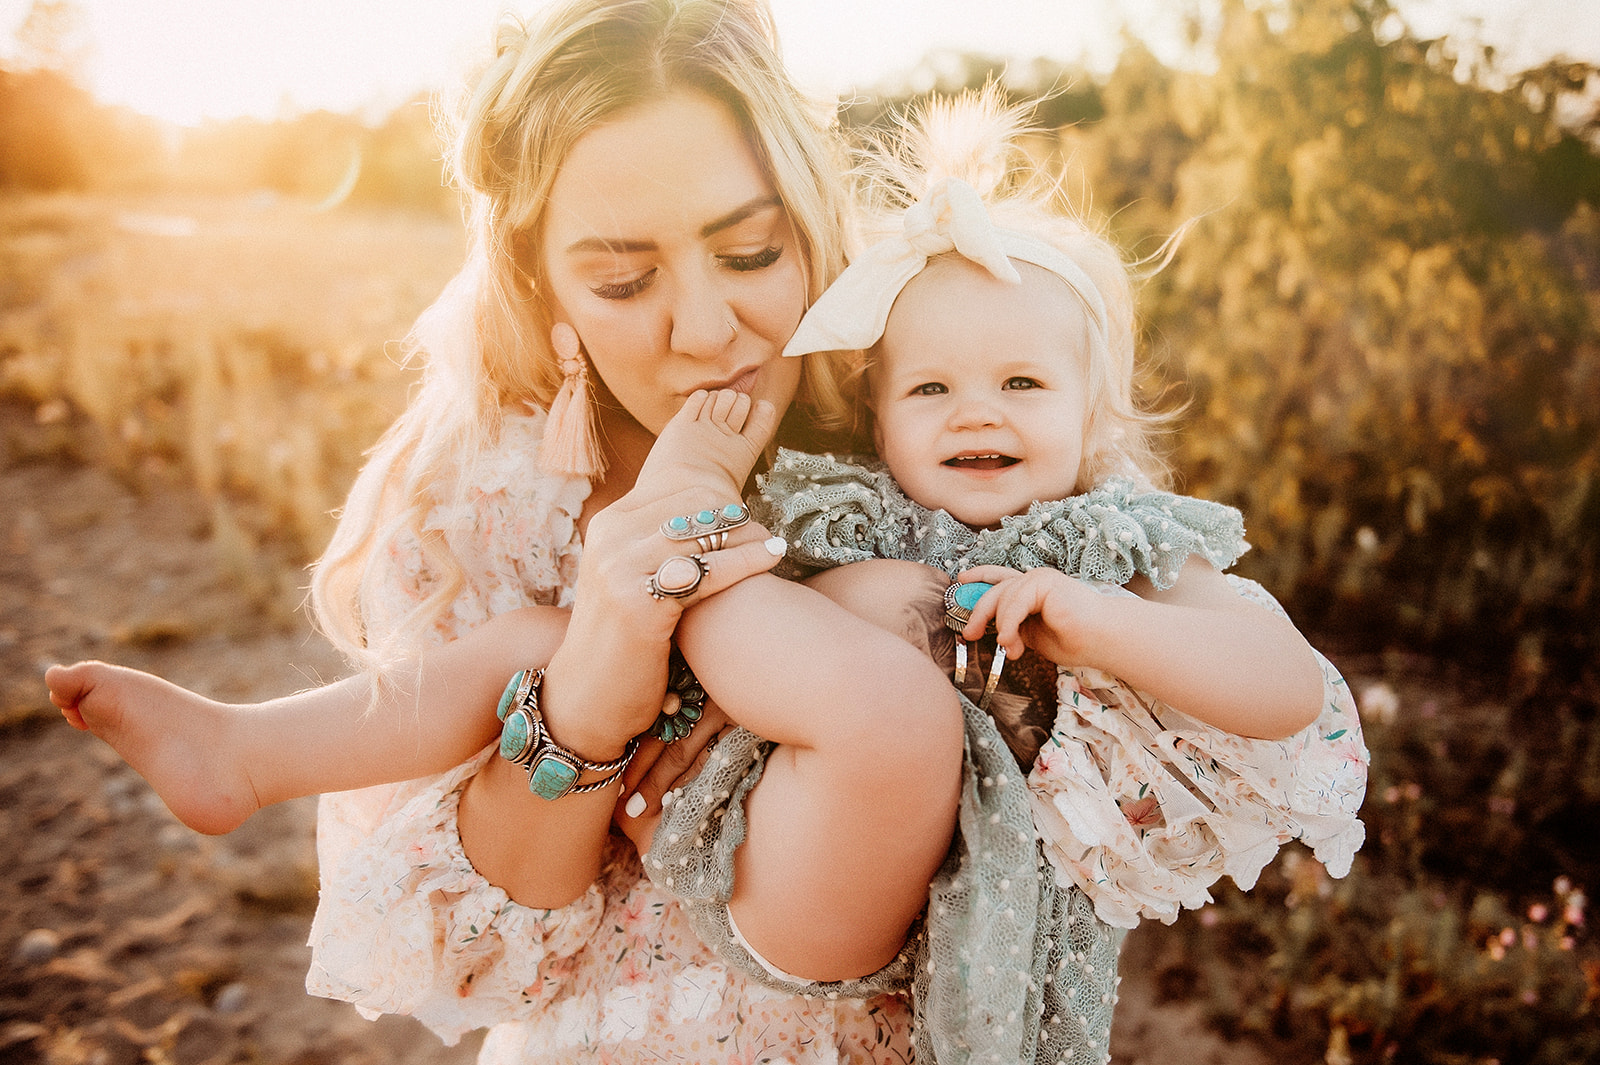 playful photos of mom and daughter at golden hour